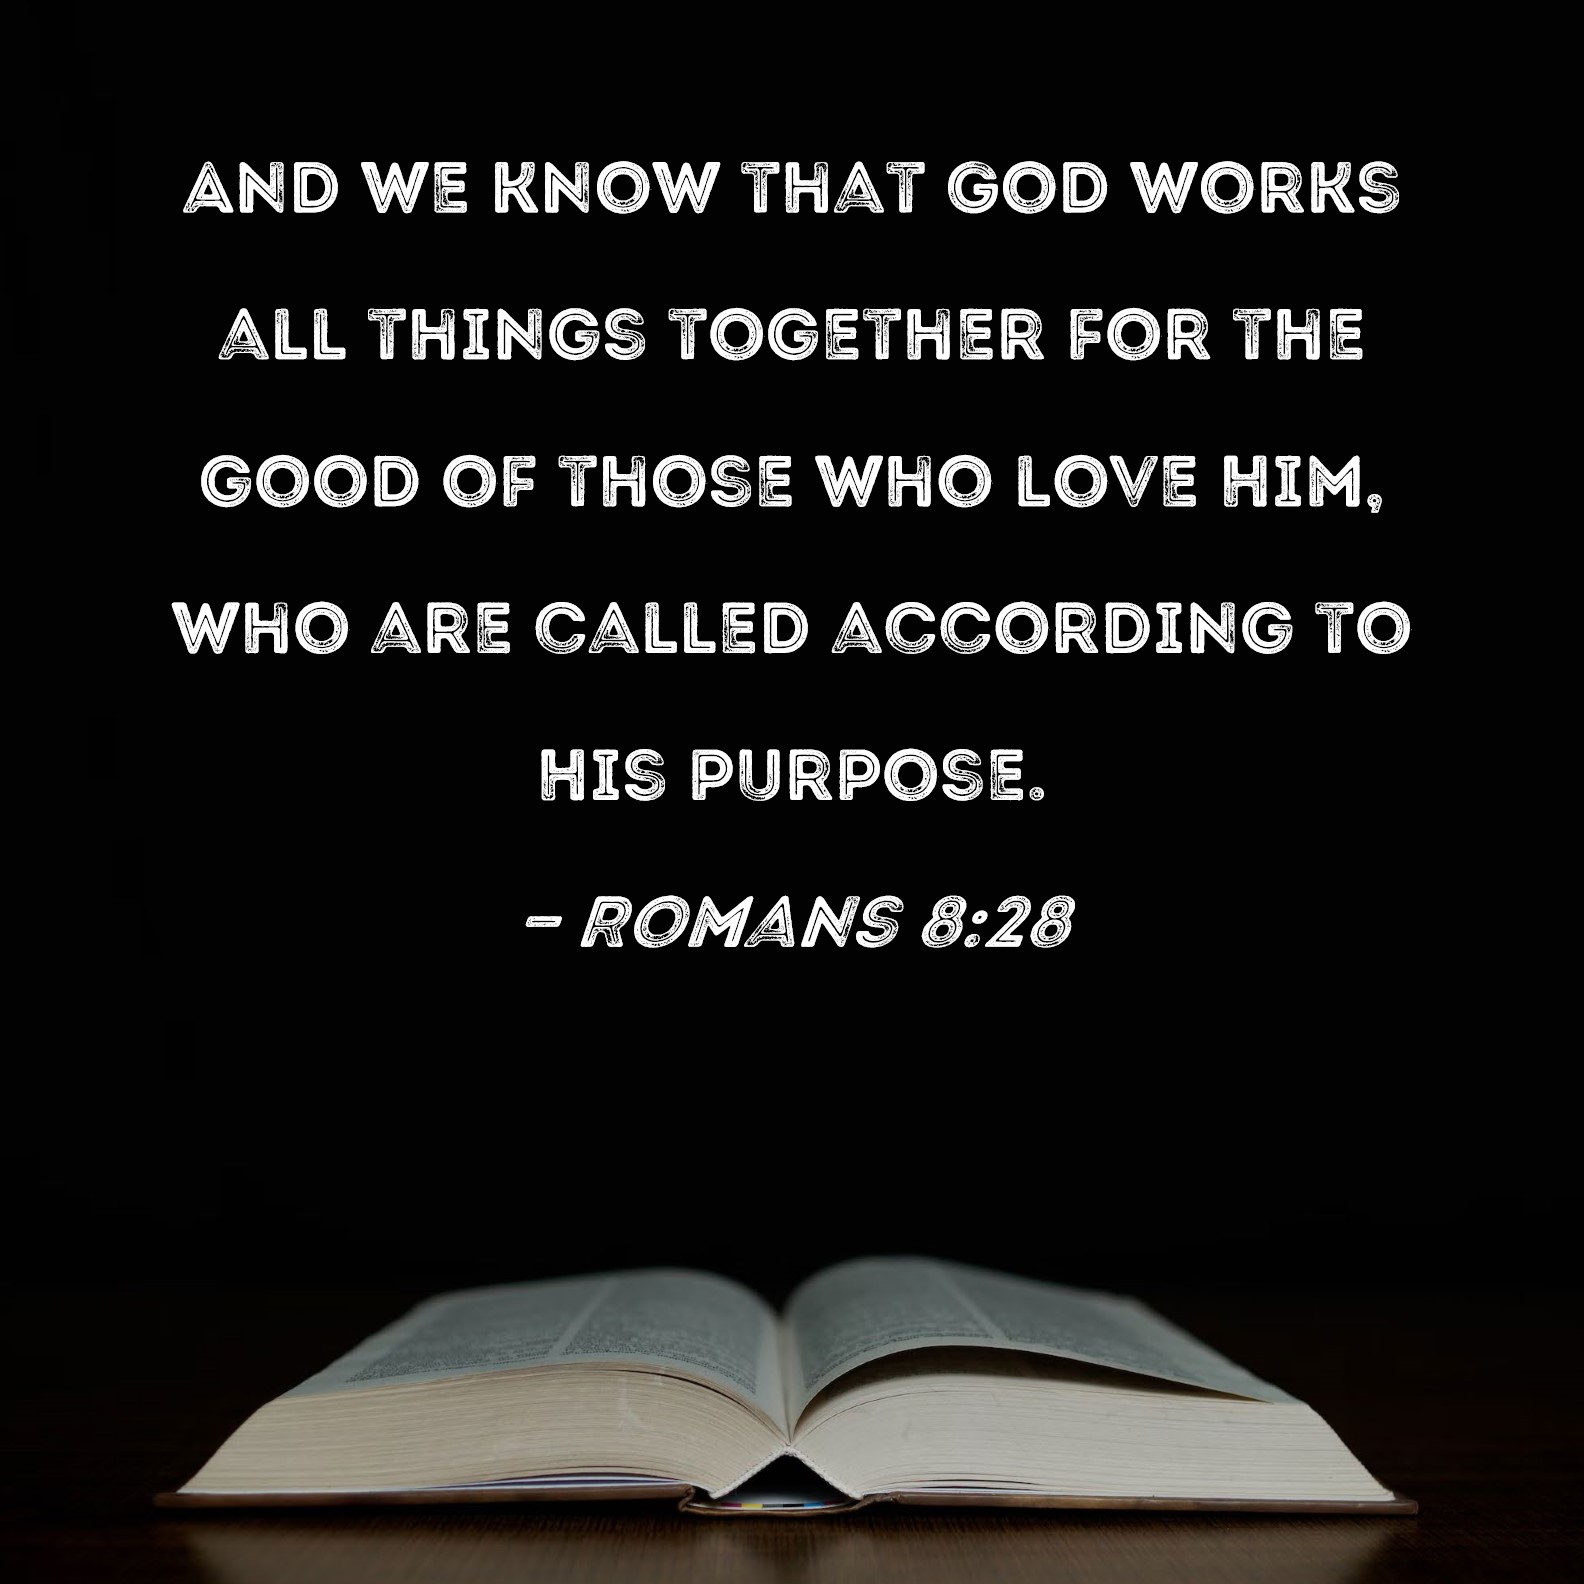 Romans 8:28 And we know that God works all things together for the